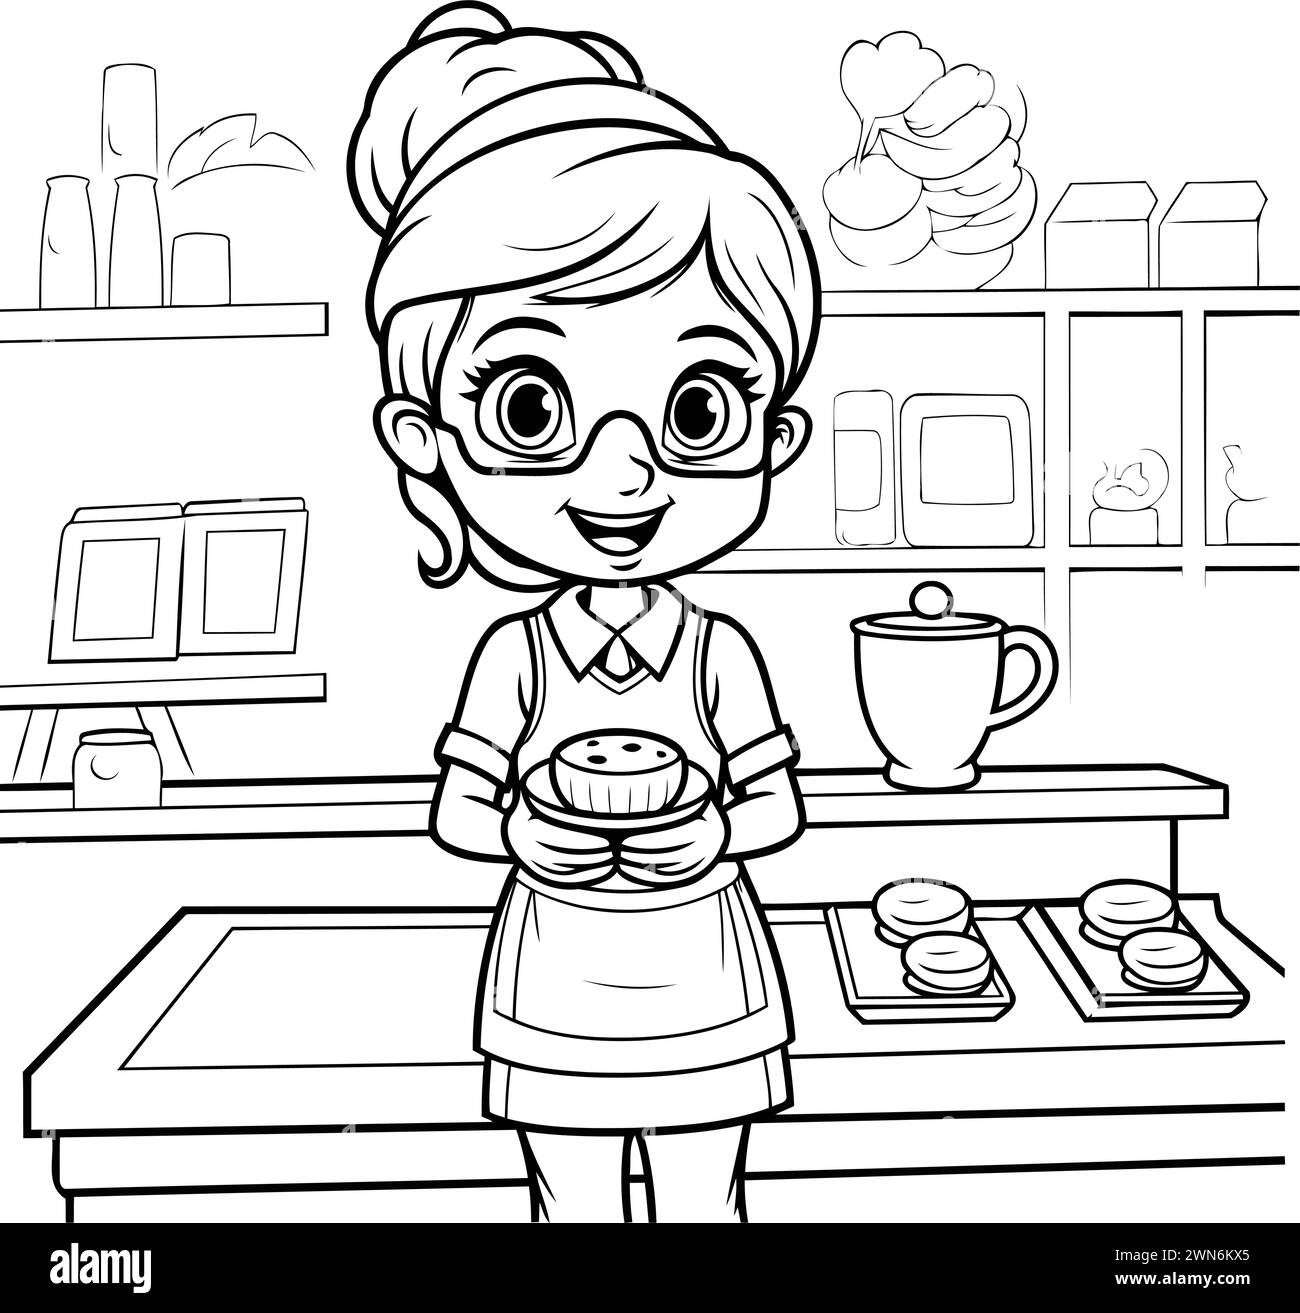 Coloring Page Outline Of a Cute Little Girl Cooking in the Kitchen Stock Vector